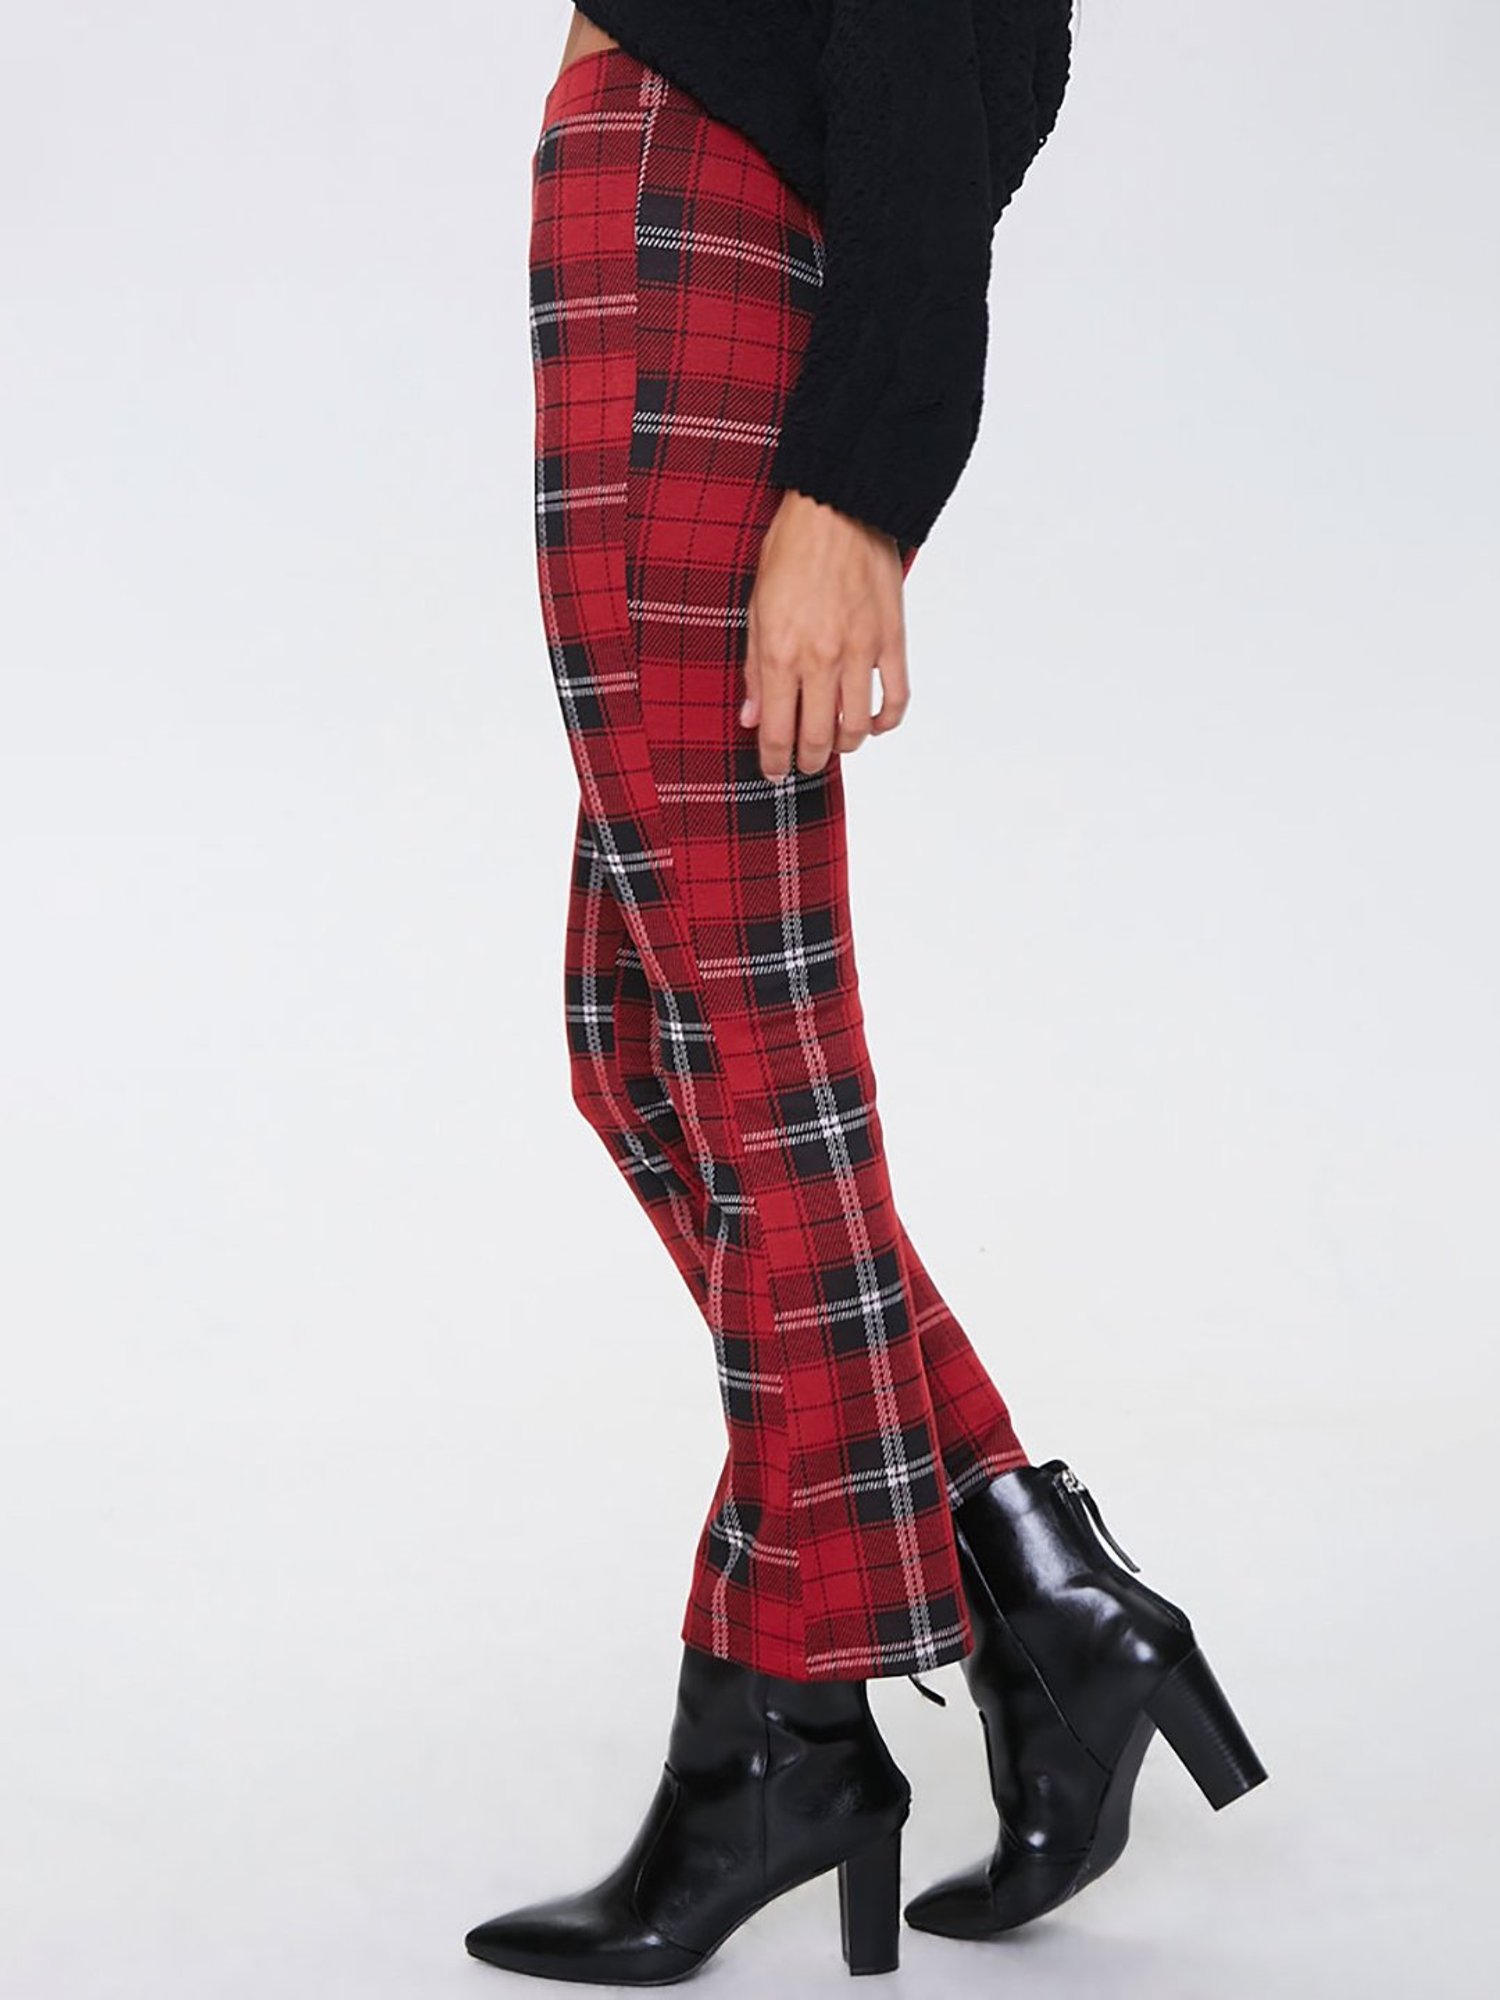 Red plaid pants PULLBEAR checkered trousers tartan gingham Womens  Fashion Bottoms Other Bottoms on Carousell